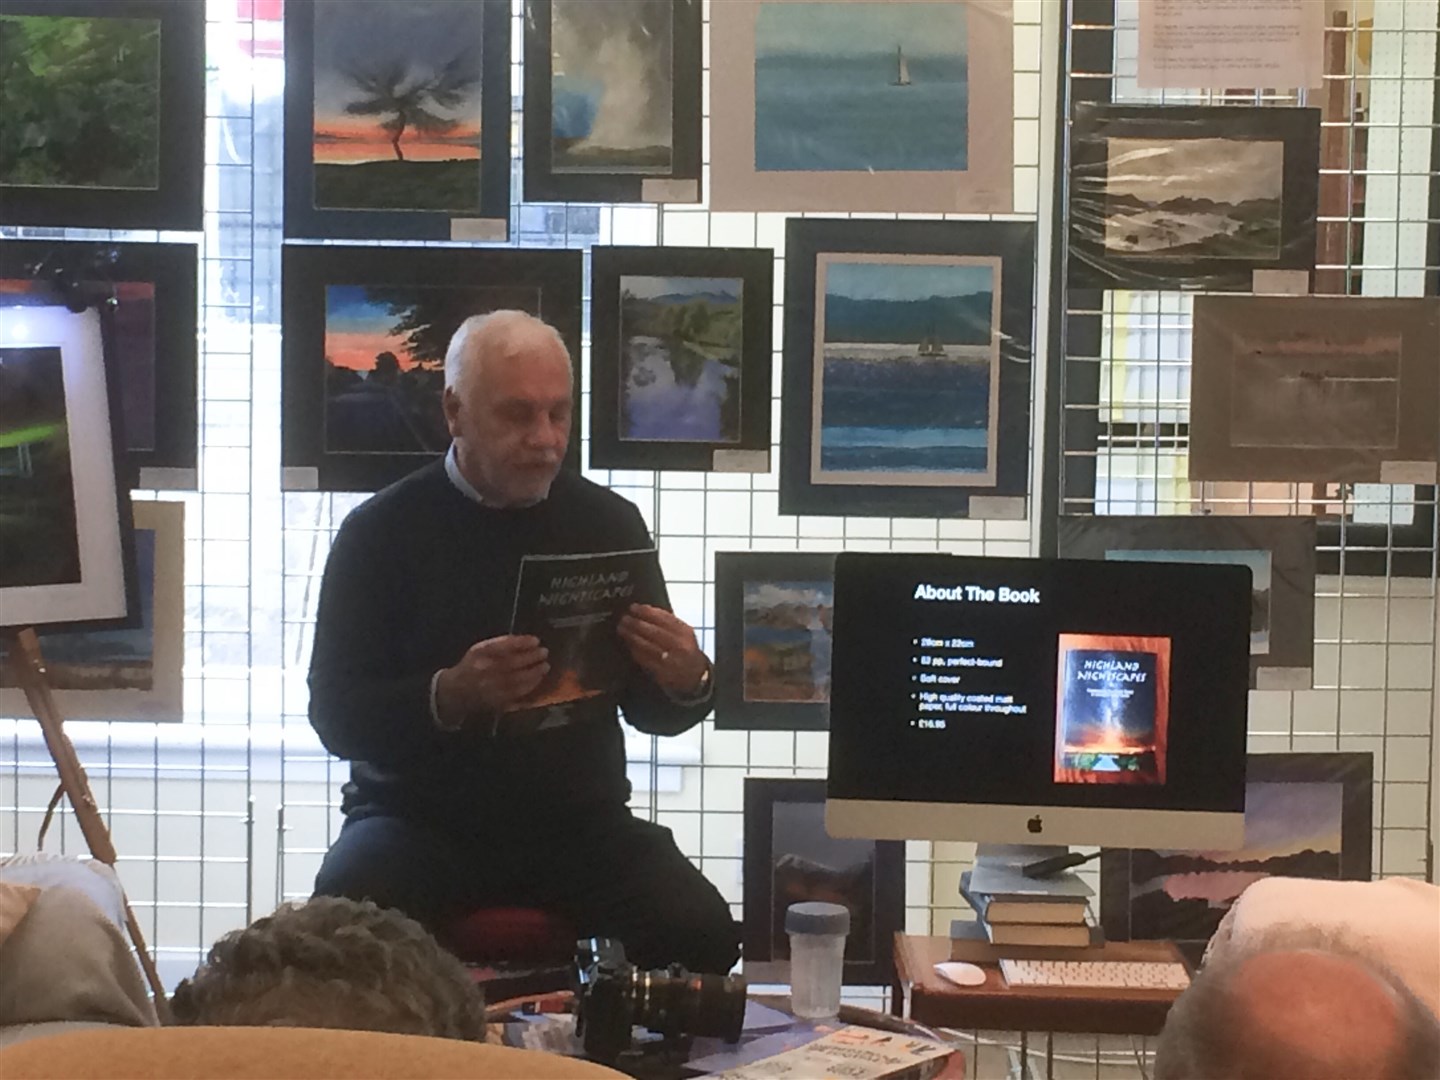 Photographer Mark Janes launched his book at the pop-up bookshop and art gallery.